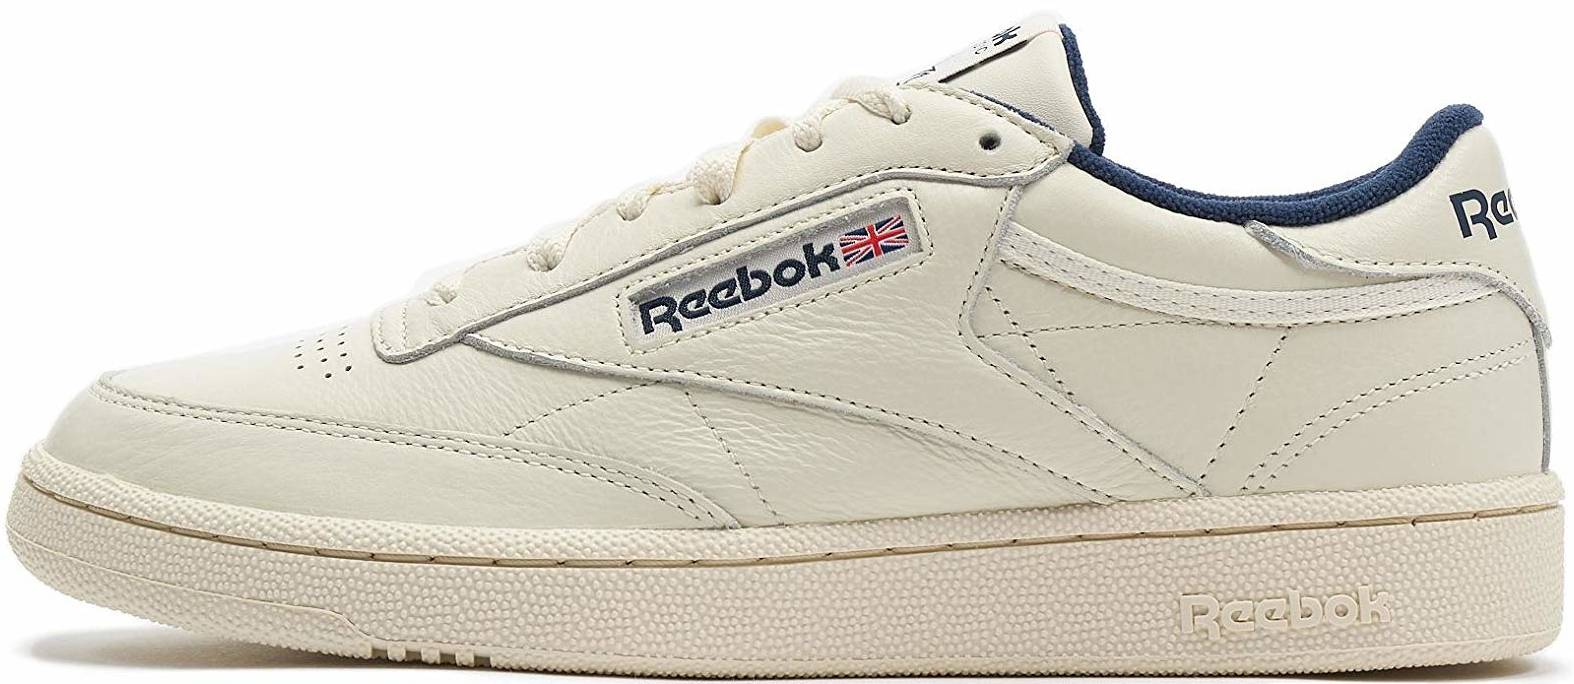 Prominent apologize Boost Reebok Club C 85 MU sneakers in 3 colors (only $39) | RunRepeat